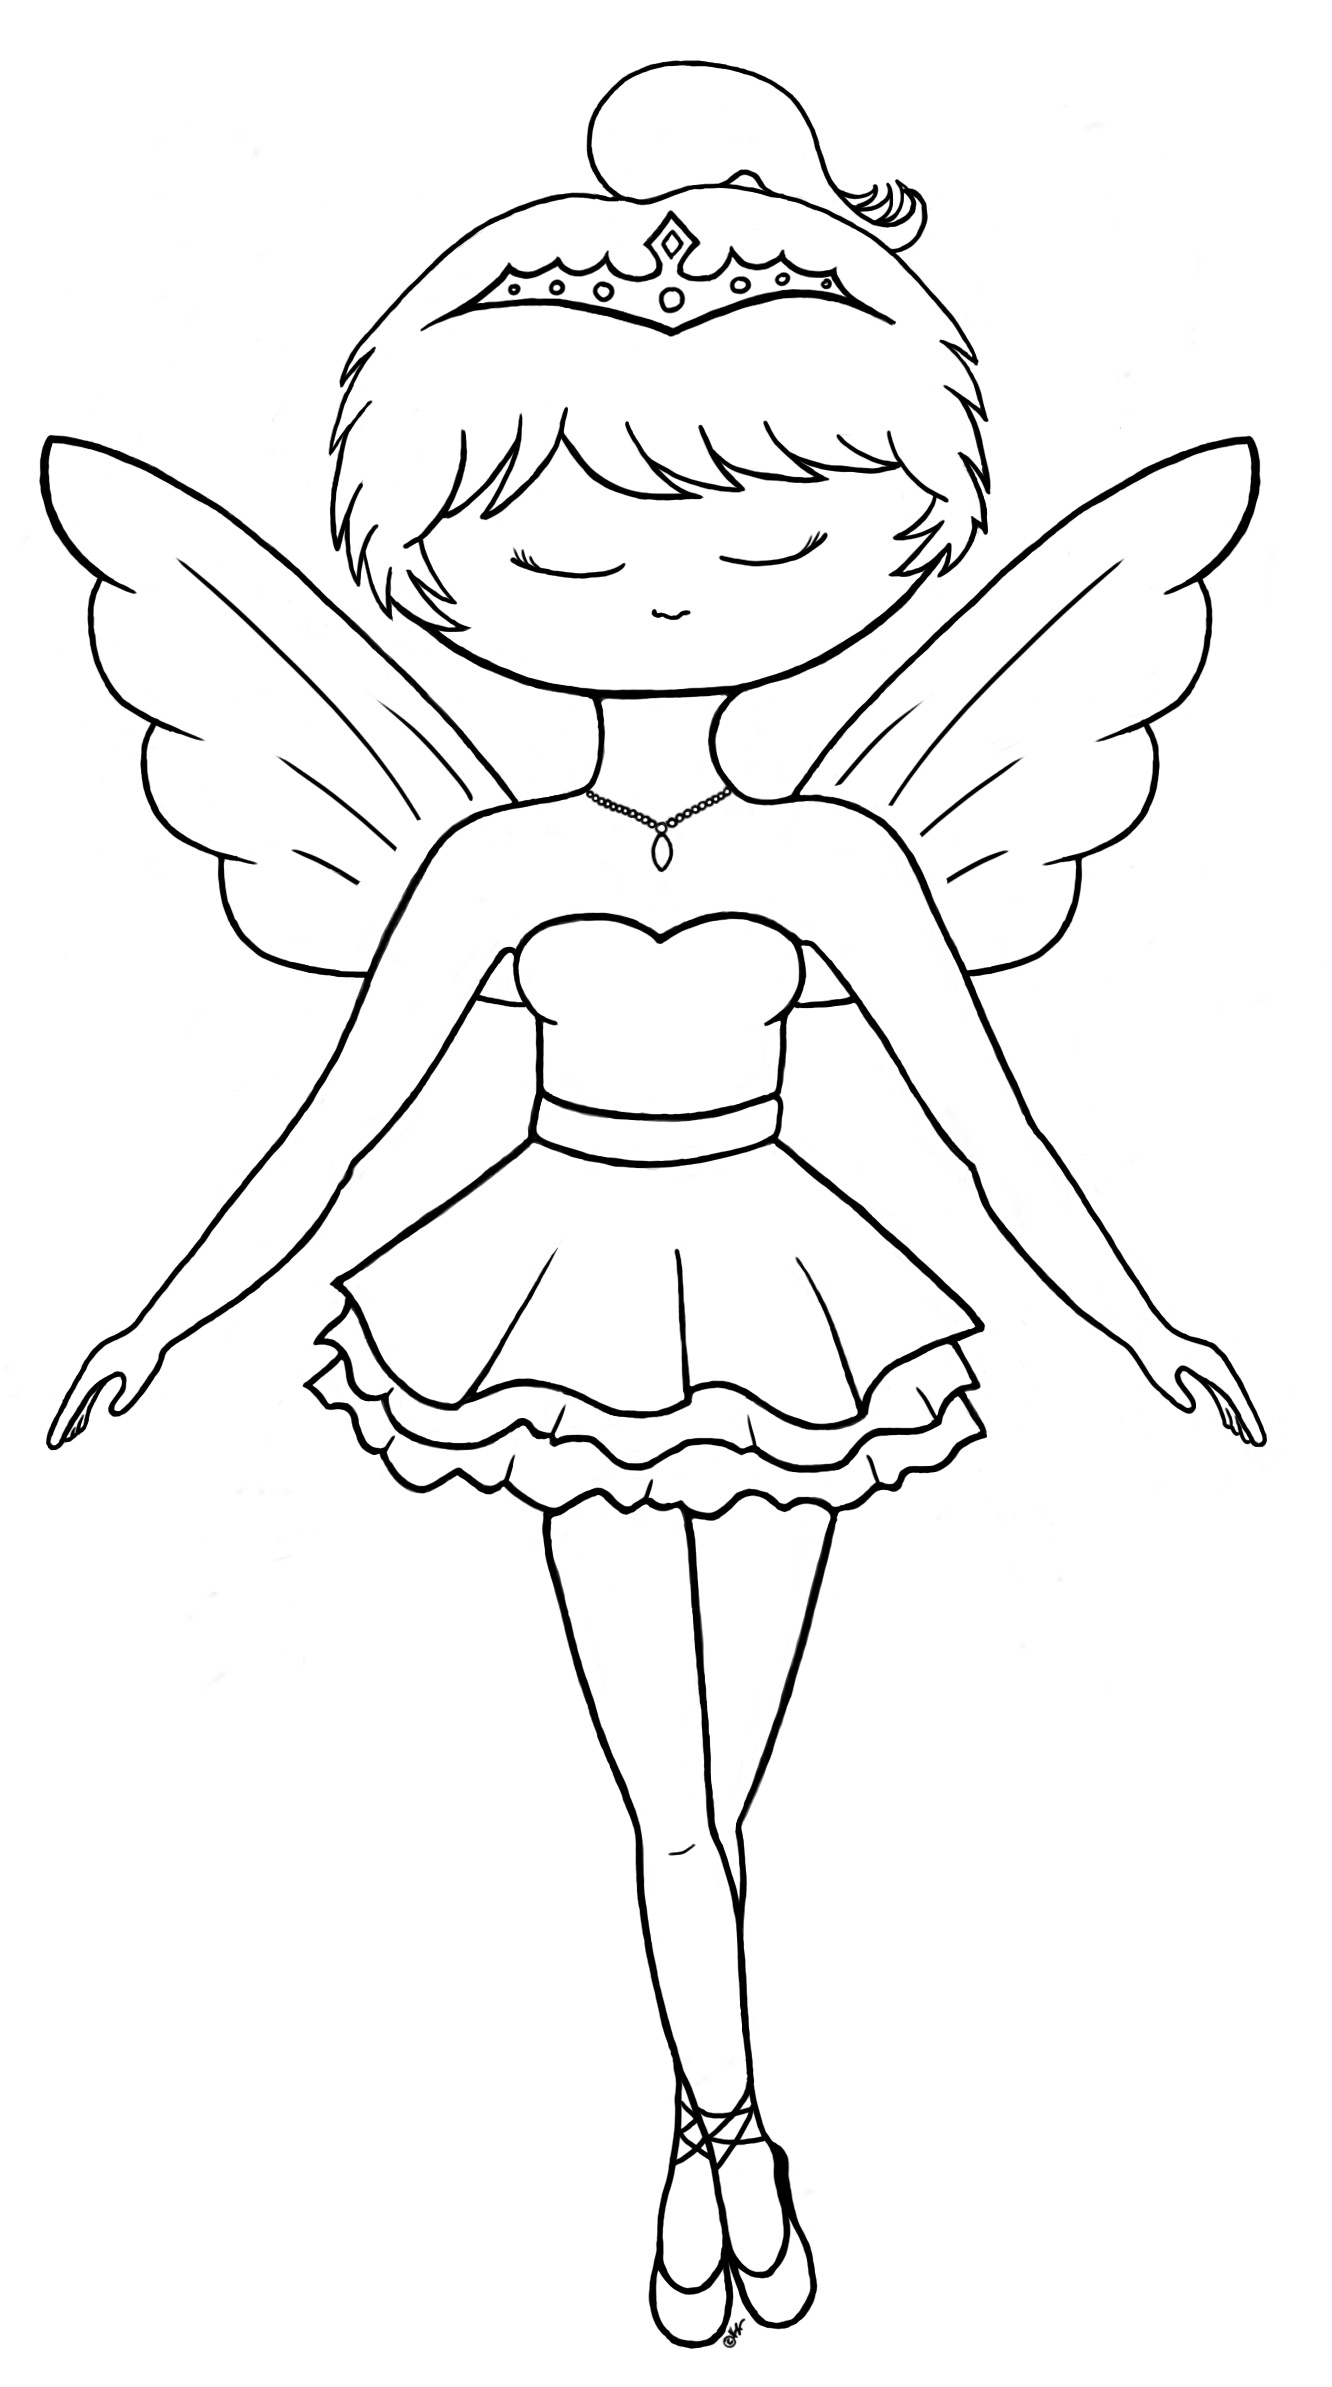 Ballerina Printable Coloring Pages Printable Ballerina Coloring Pages For Kids Coloringstar